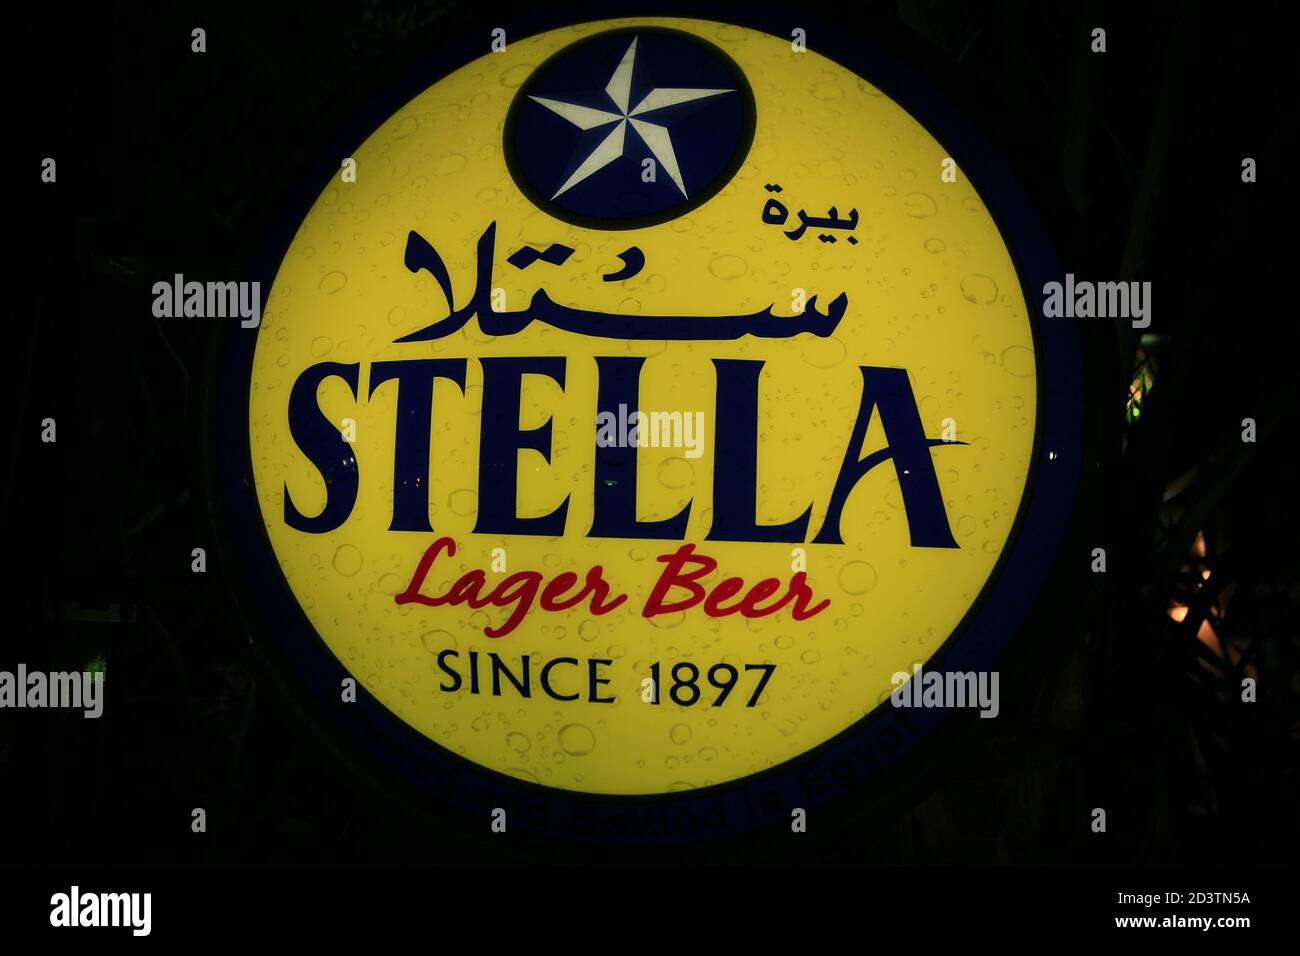 Stella lager beer add. Stock Photo